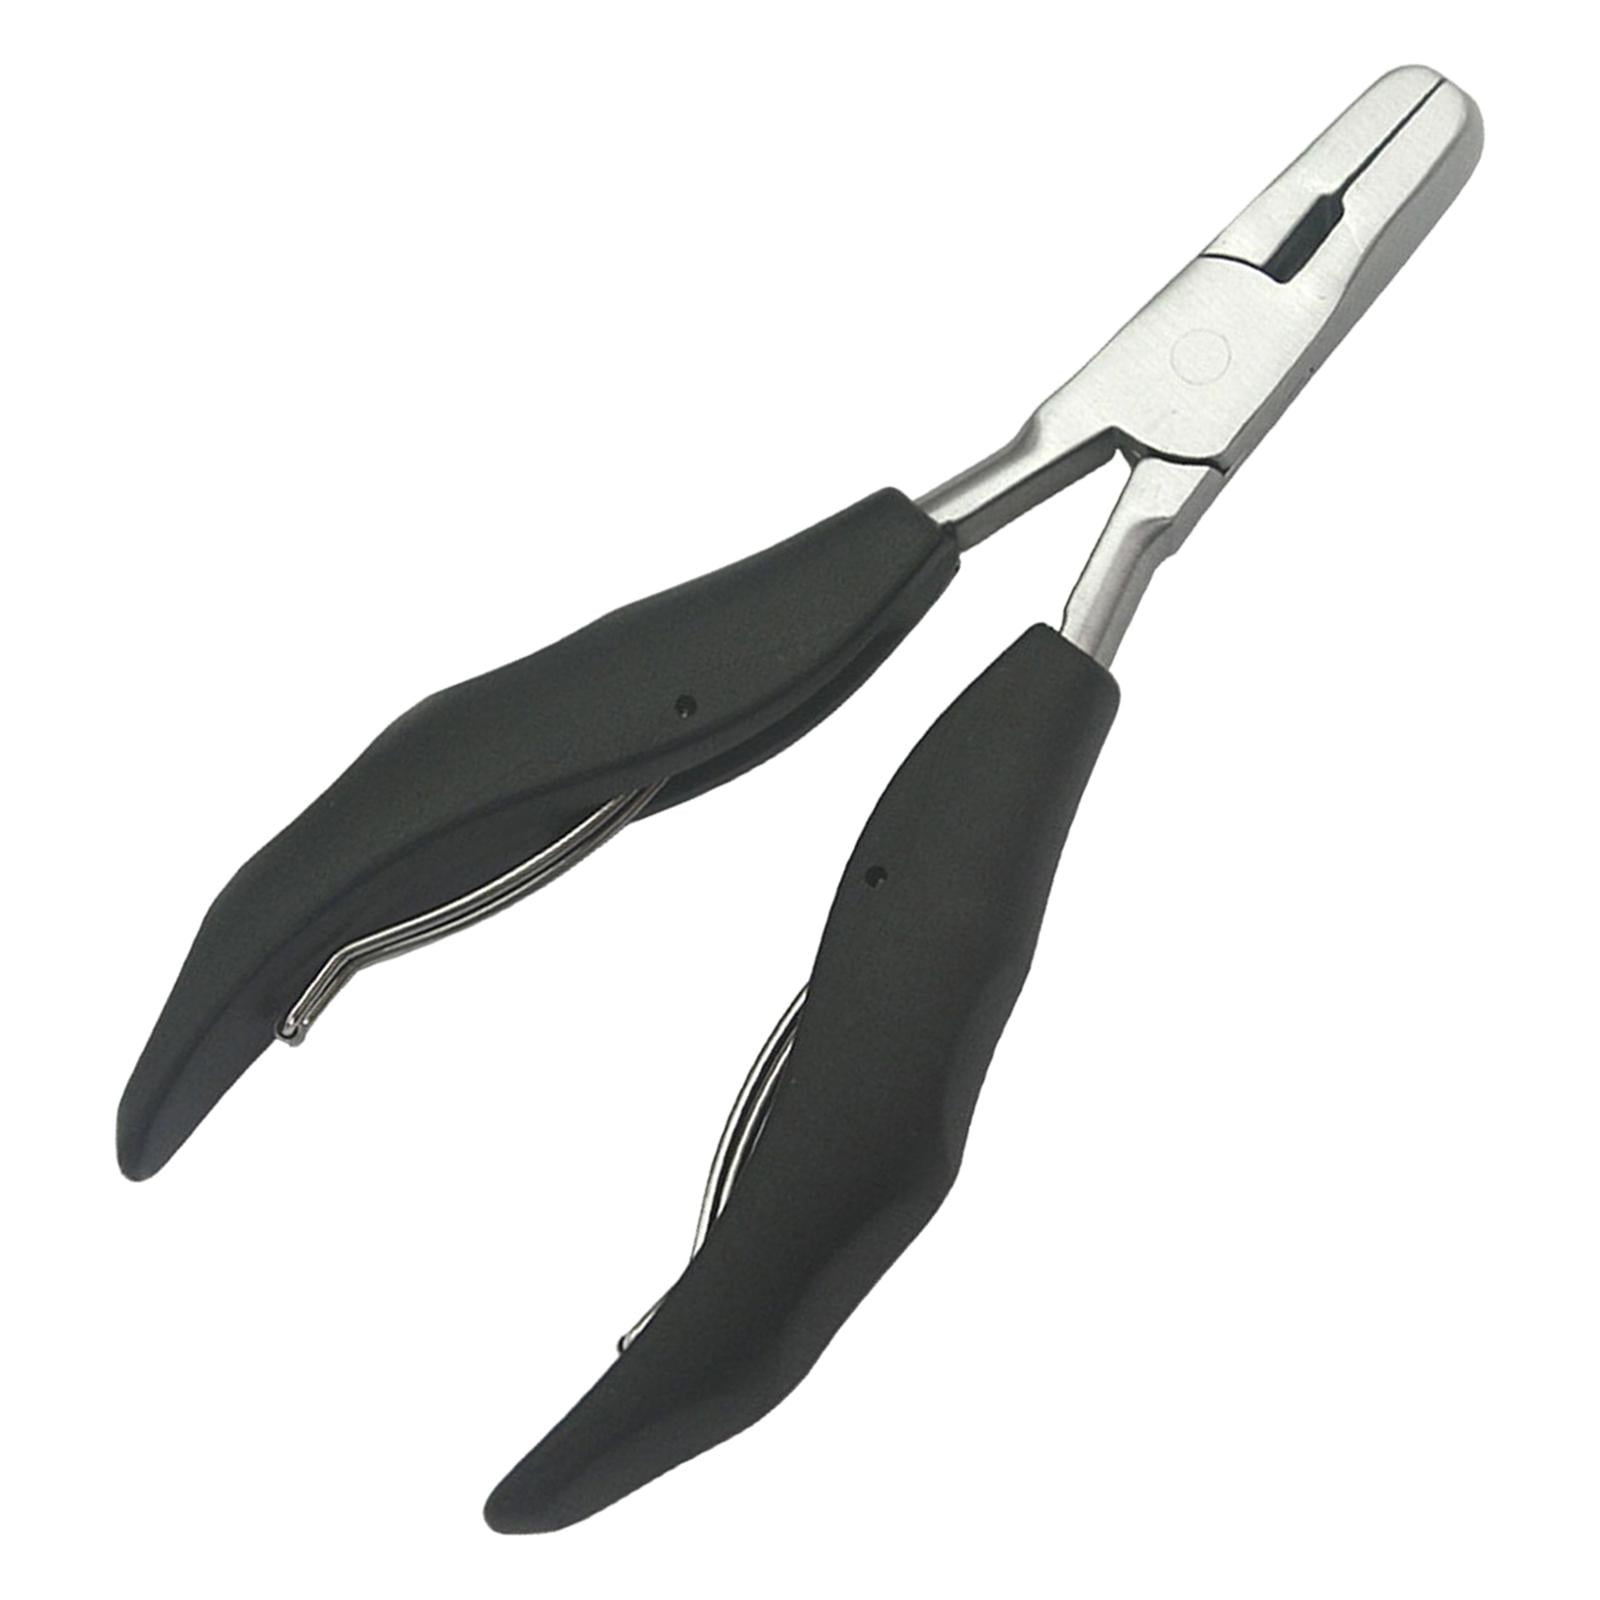 U-Shaped Pliers for Hot Fusion Hair Extensions